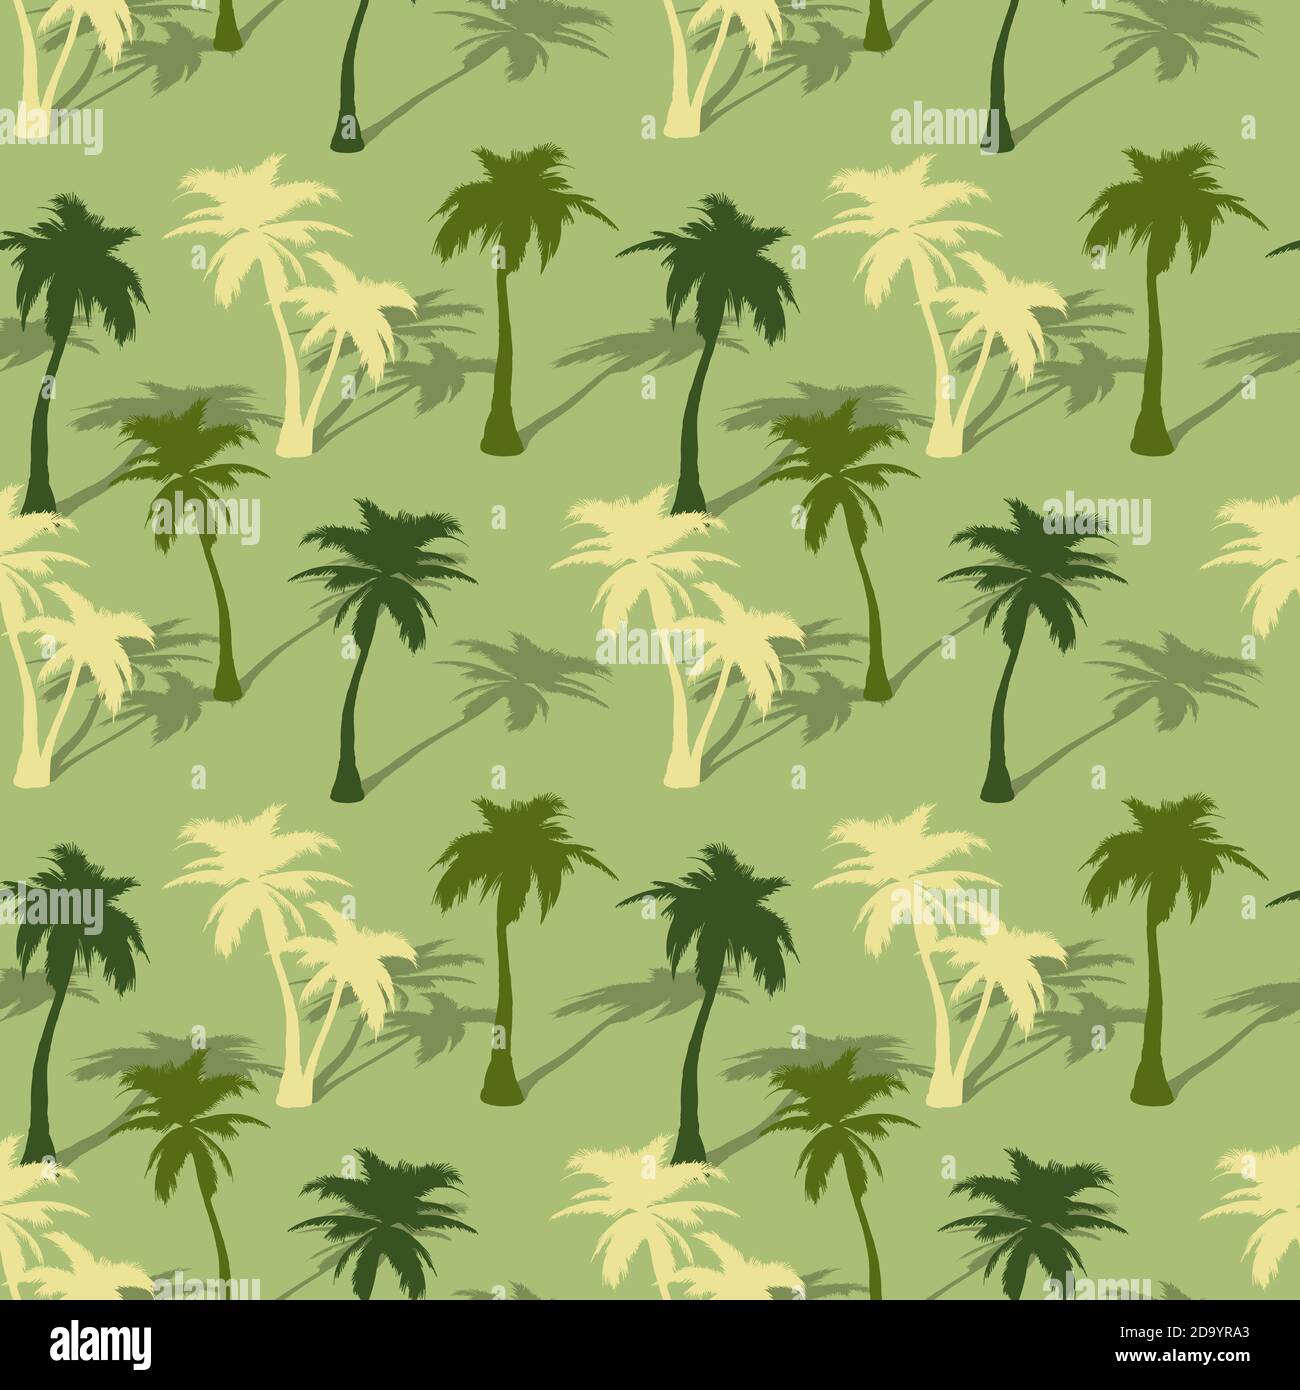 Tropical palm tree seamless pattern Stock Vector